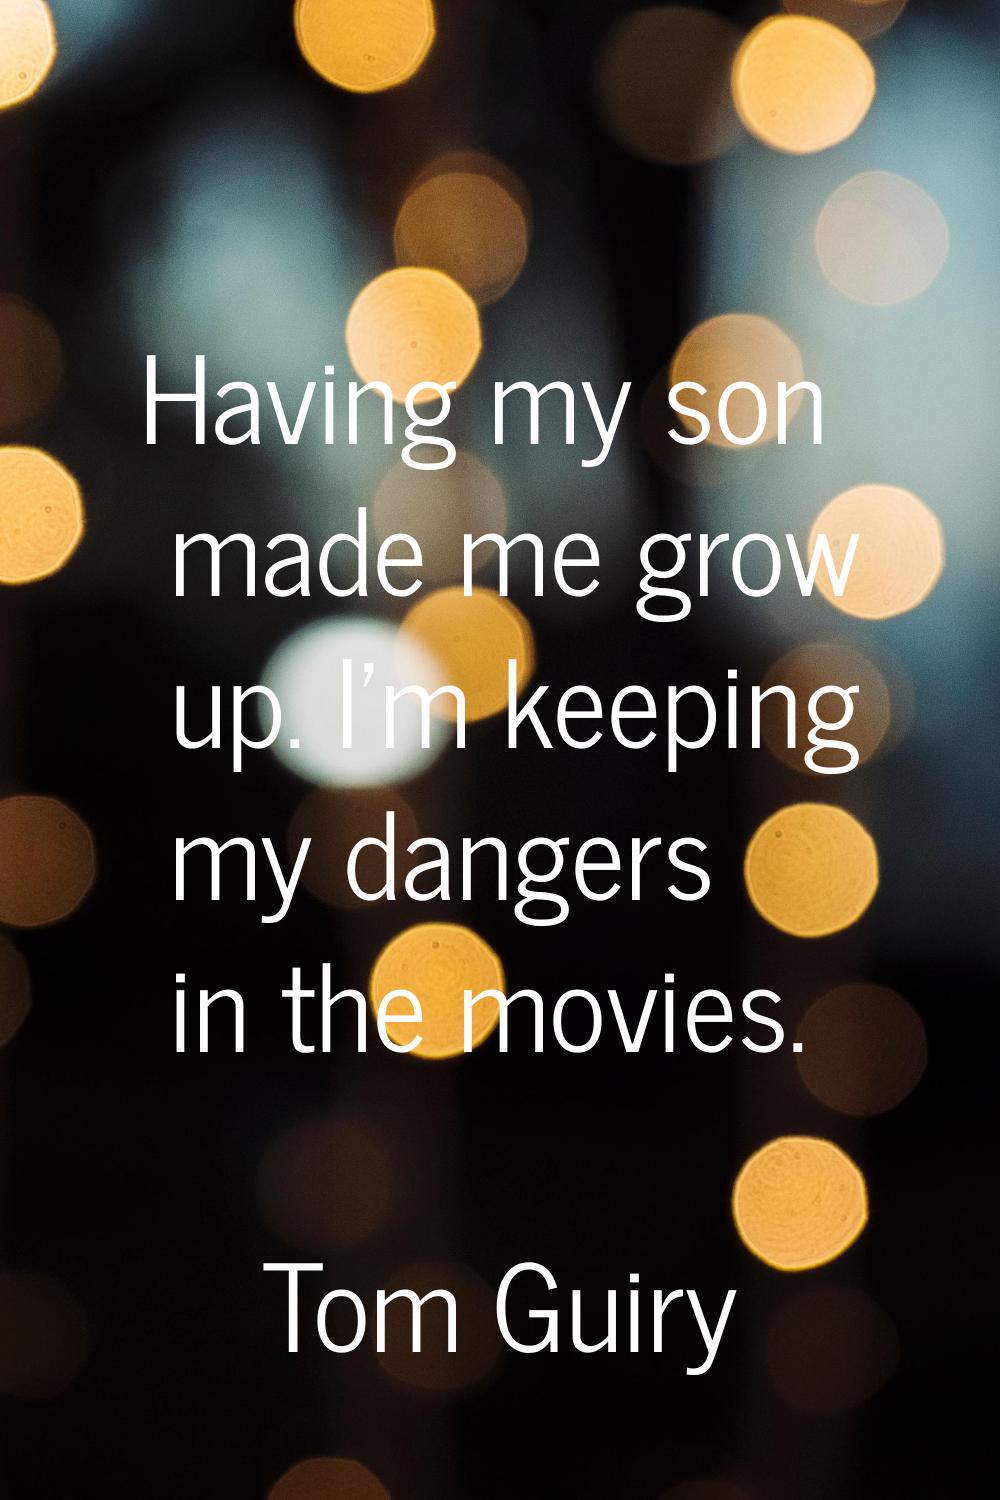 Having my son made me grow up. I'm keeping my dangers in the movies.